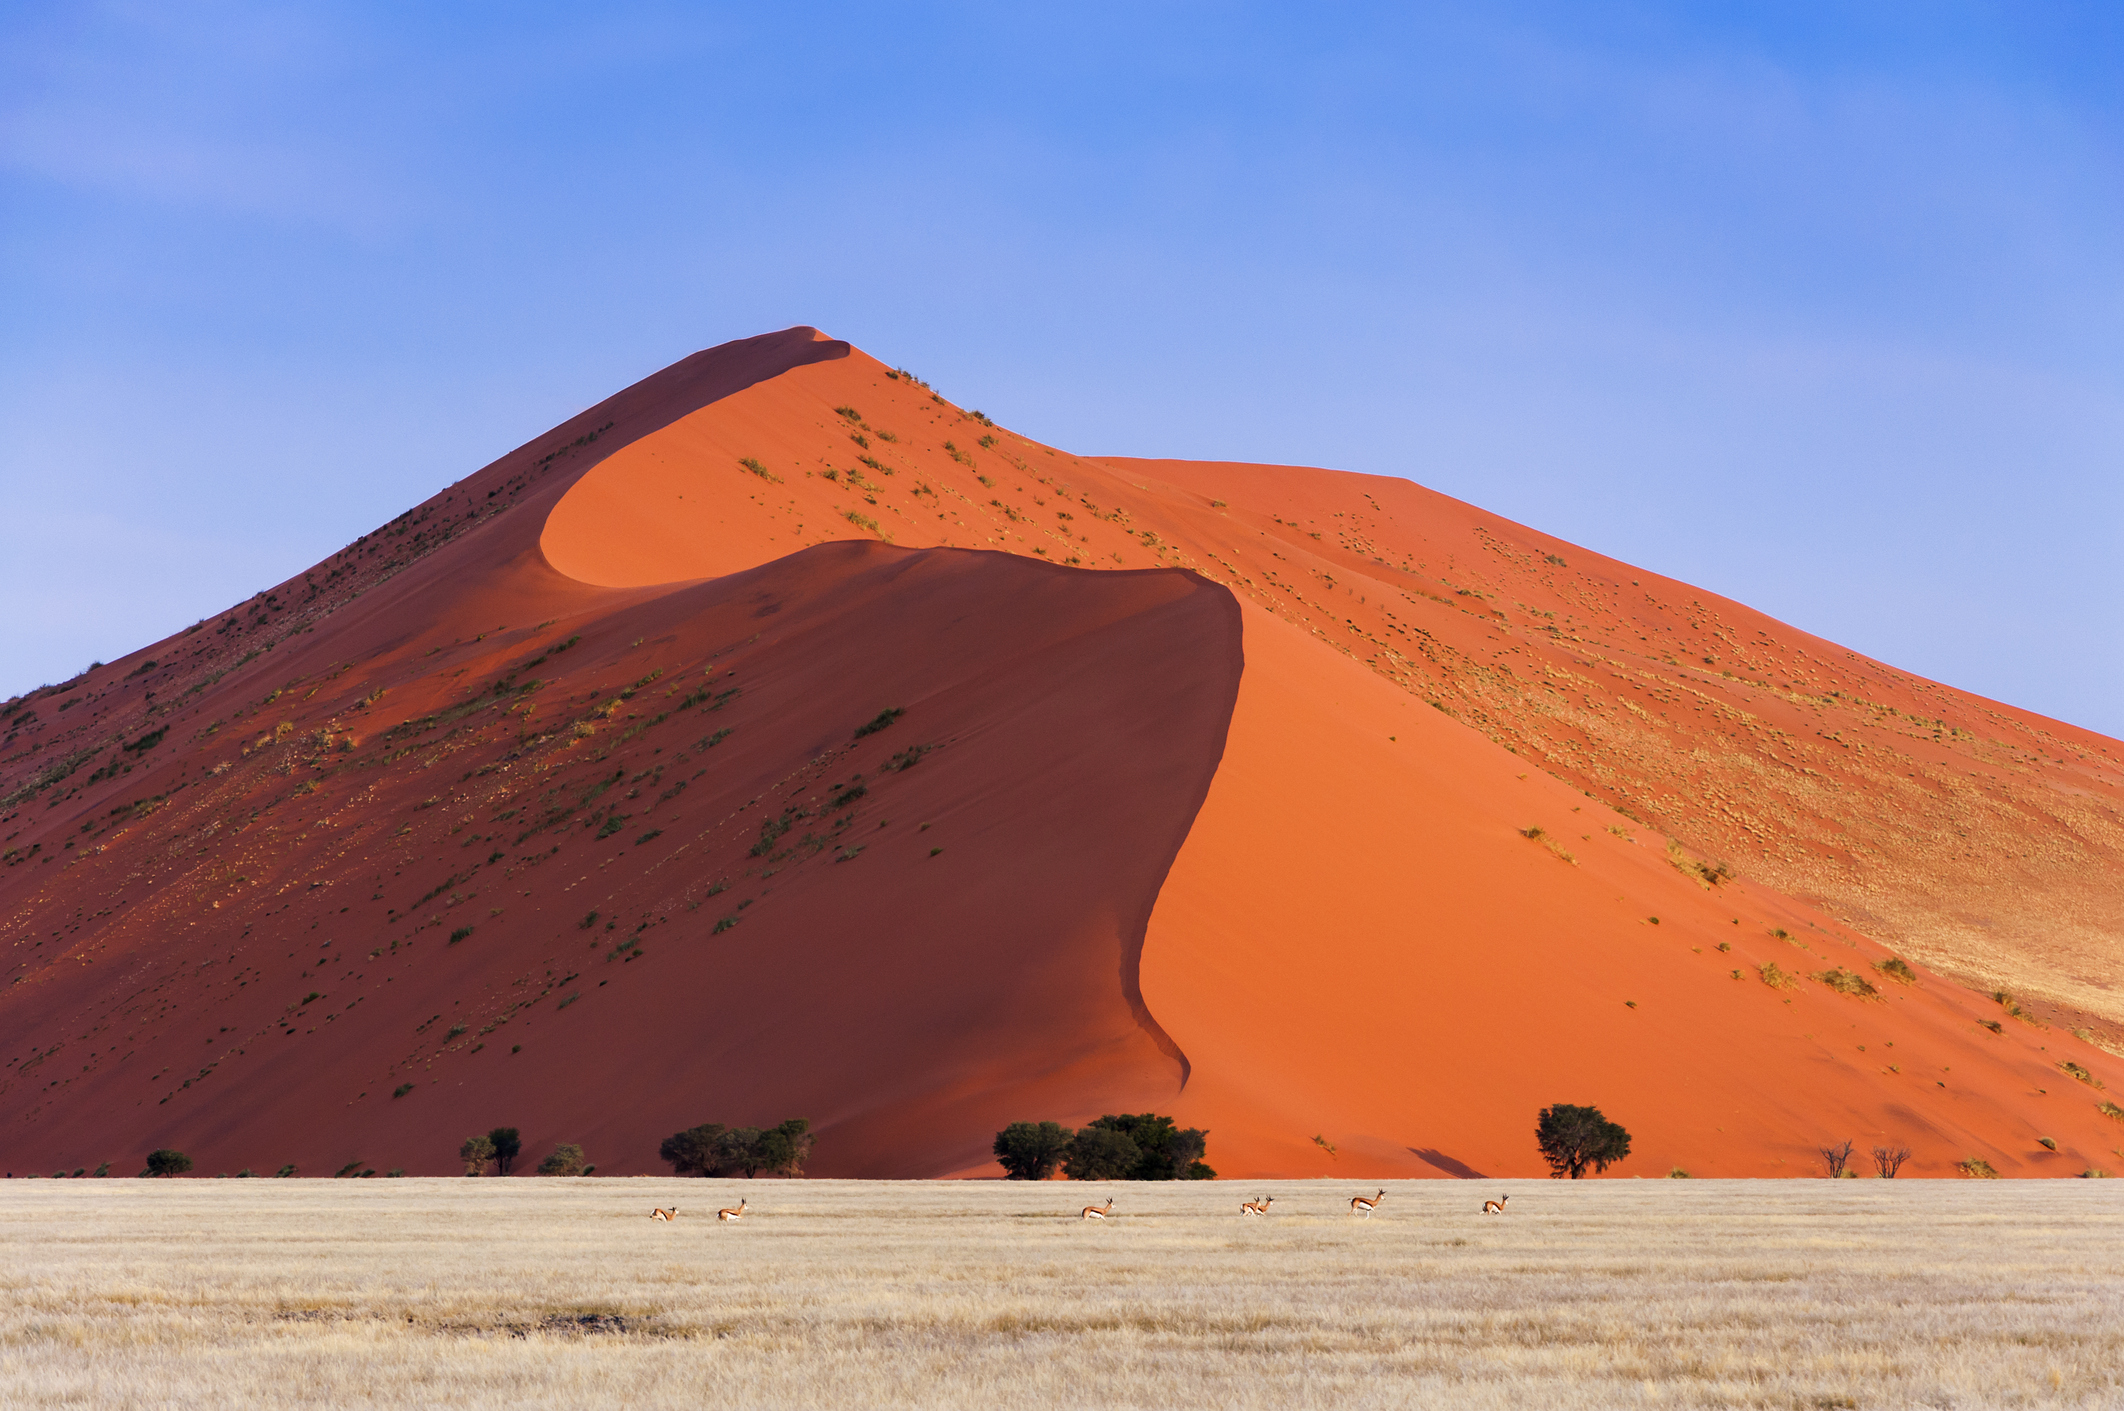 Sossusvlei Desert, Namibia: Africa’s Lesser-Known Oasis of Beauty and Serenity